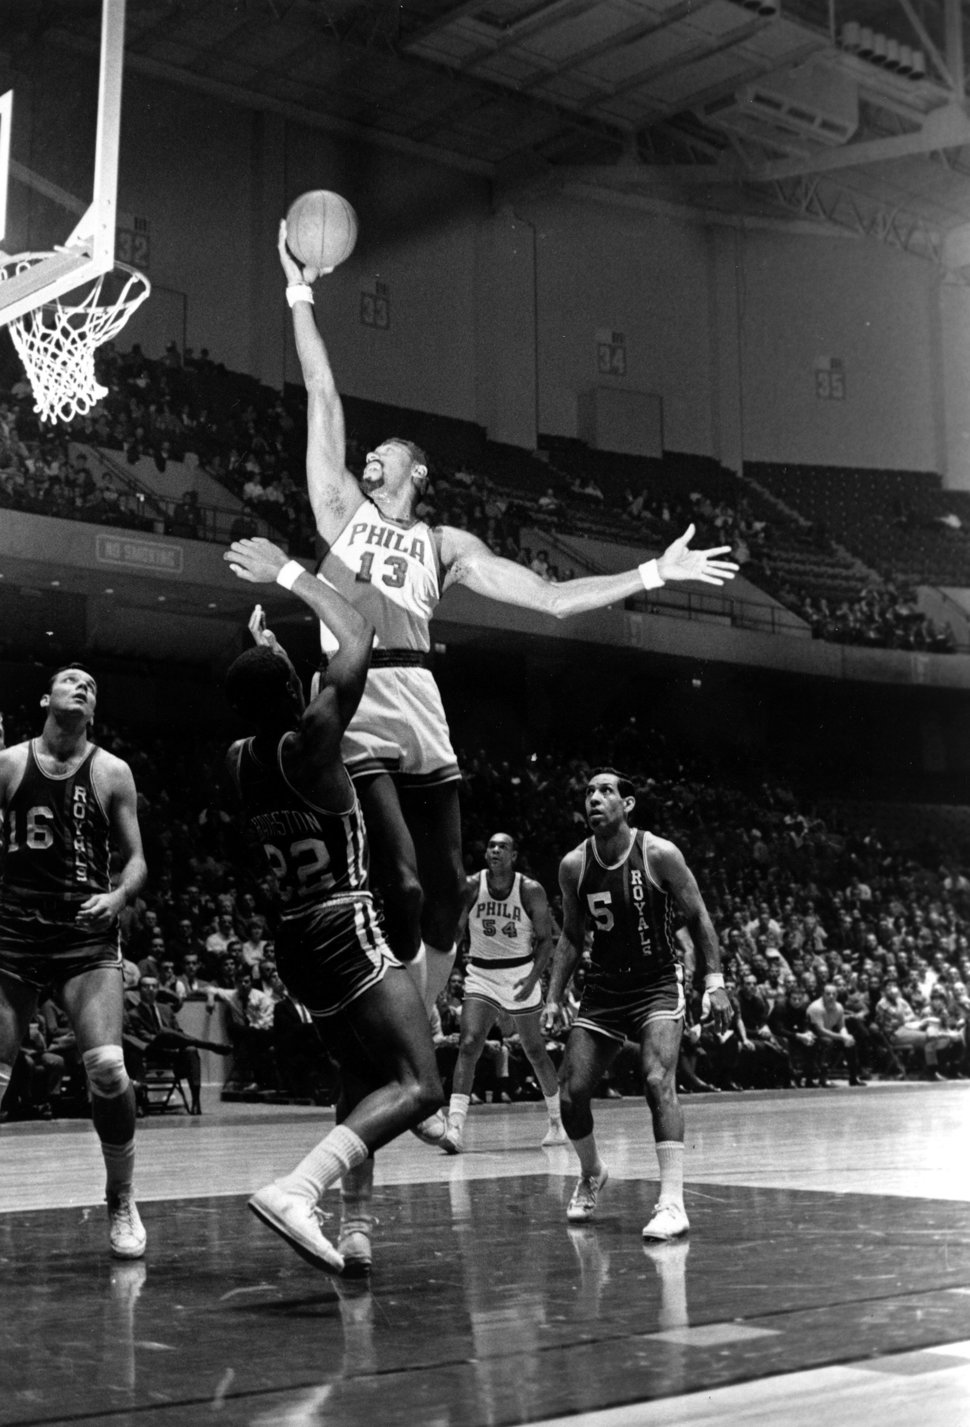 Basketball as we know it was molded by Wilt Chamberlain's dominance on the court.